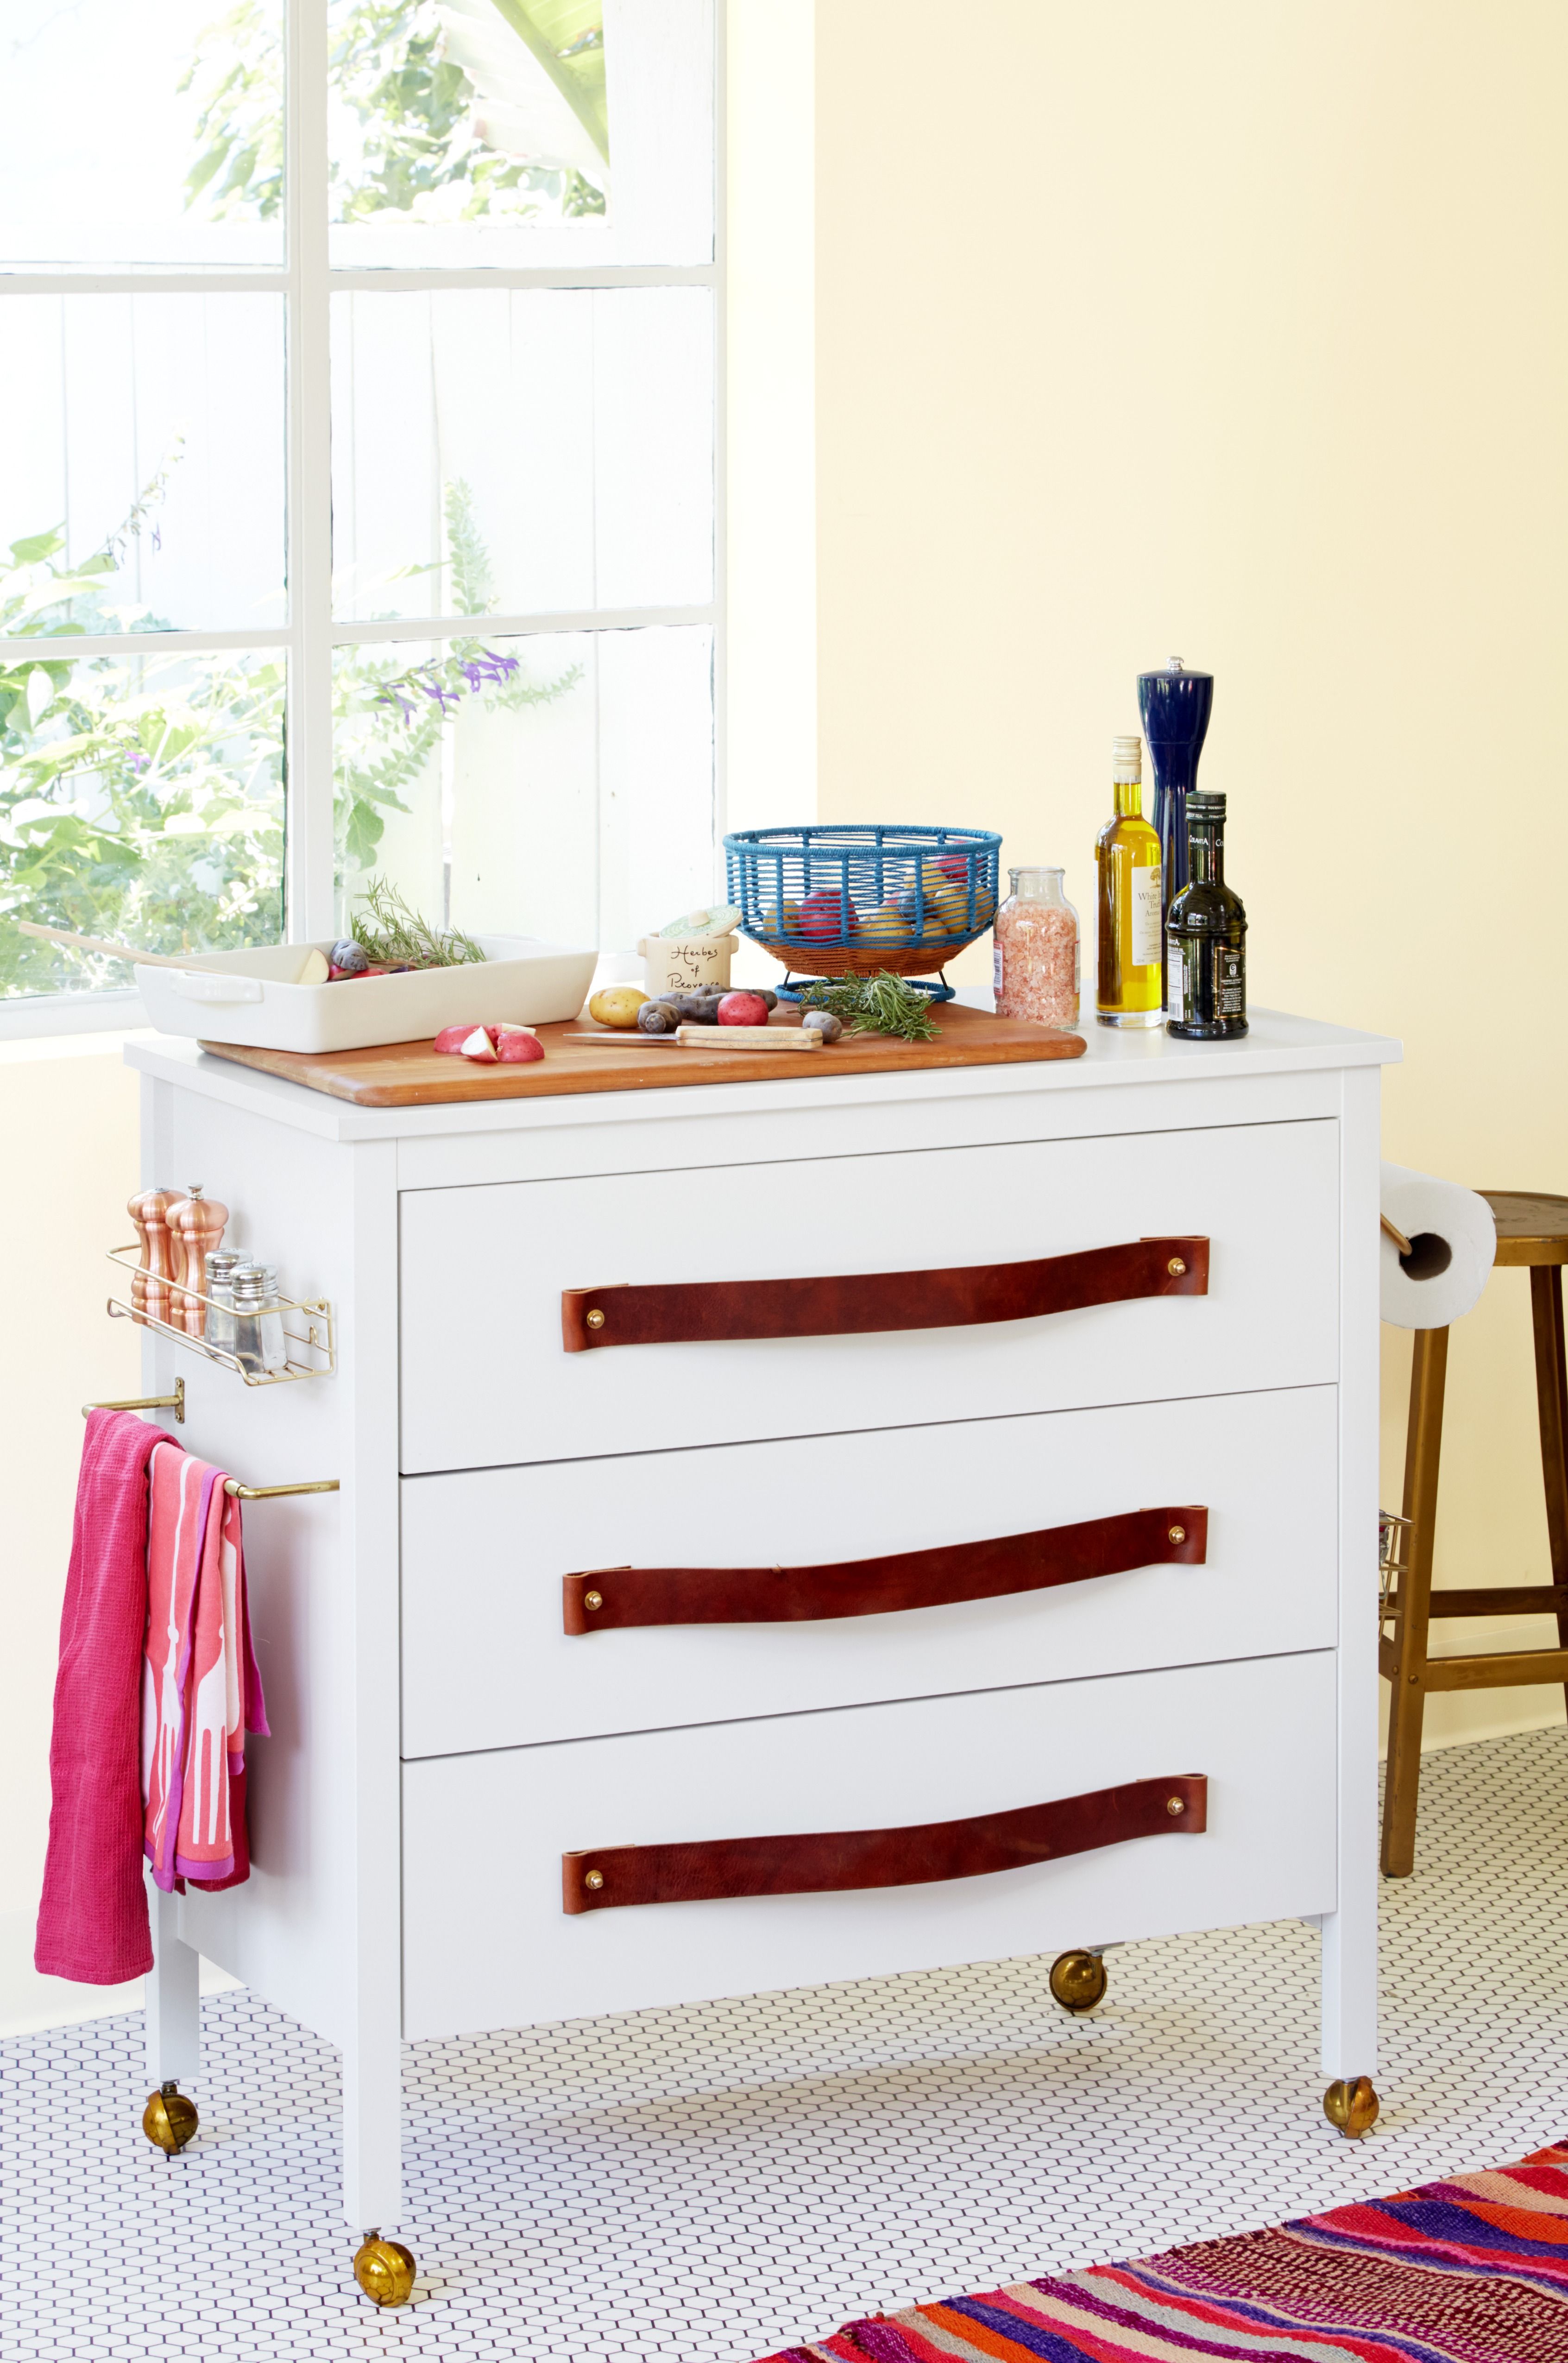 15 Upcycled Furniture Ideas, White Dresser Top Protector